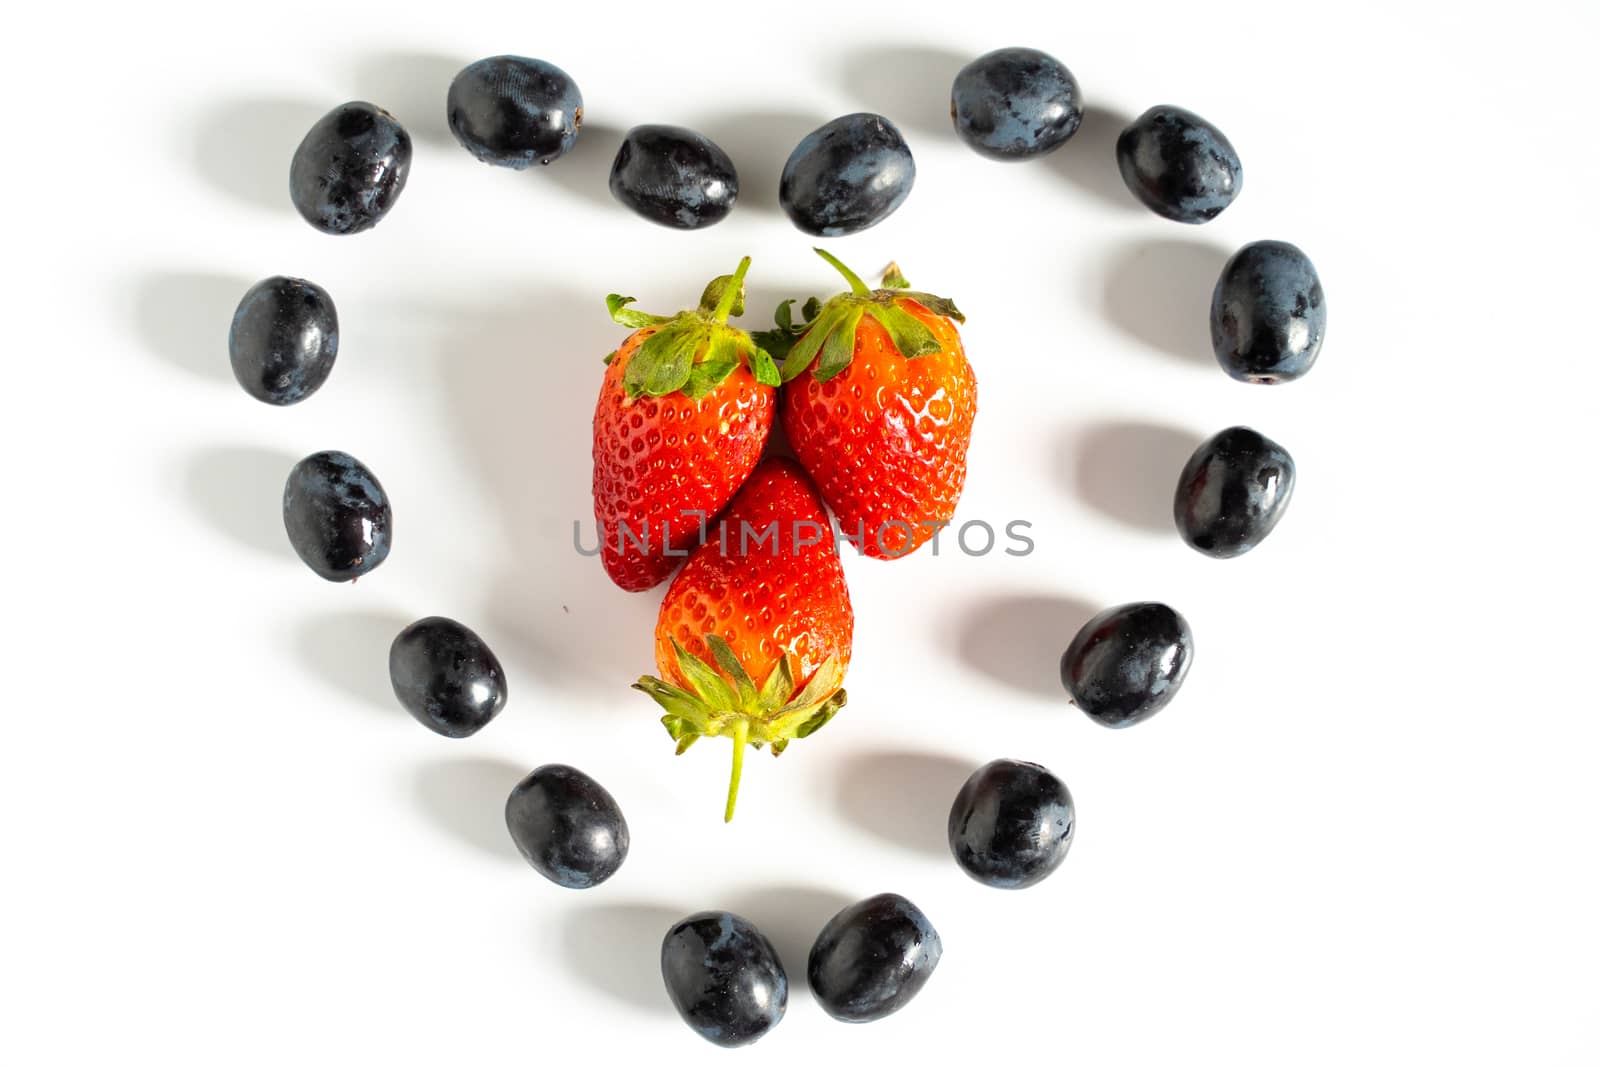 Three strawberries in the center of a heart shape pattern of black grapes